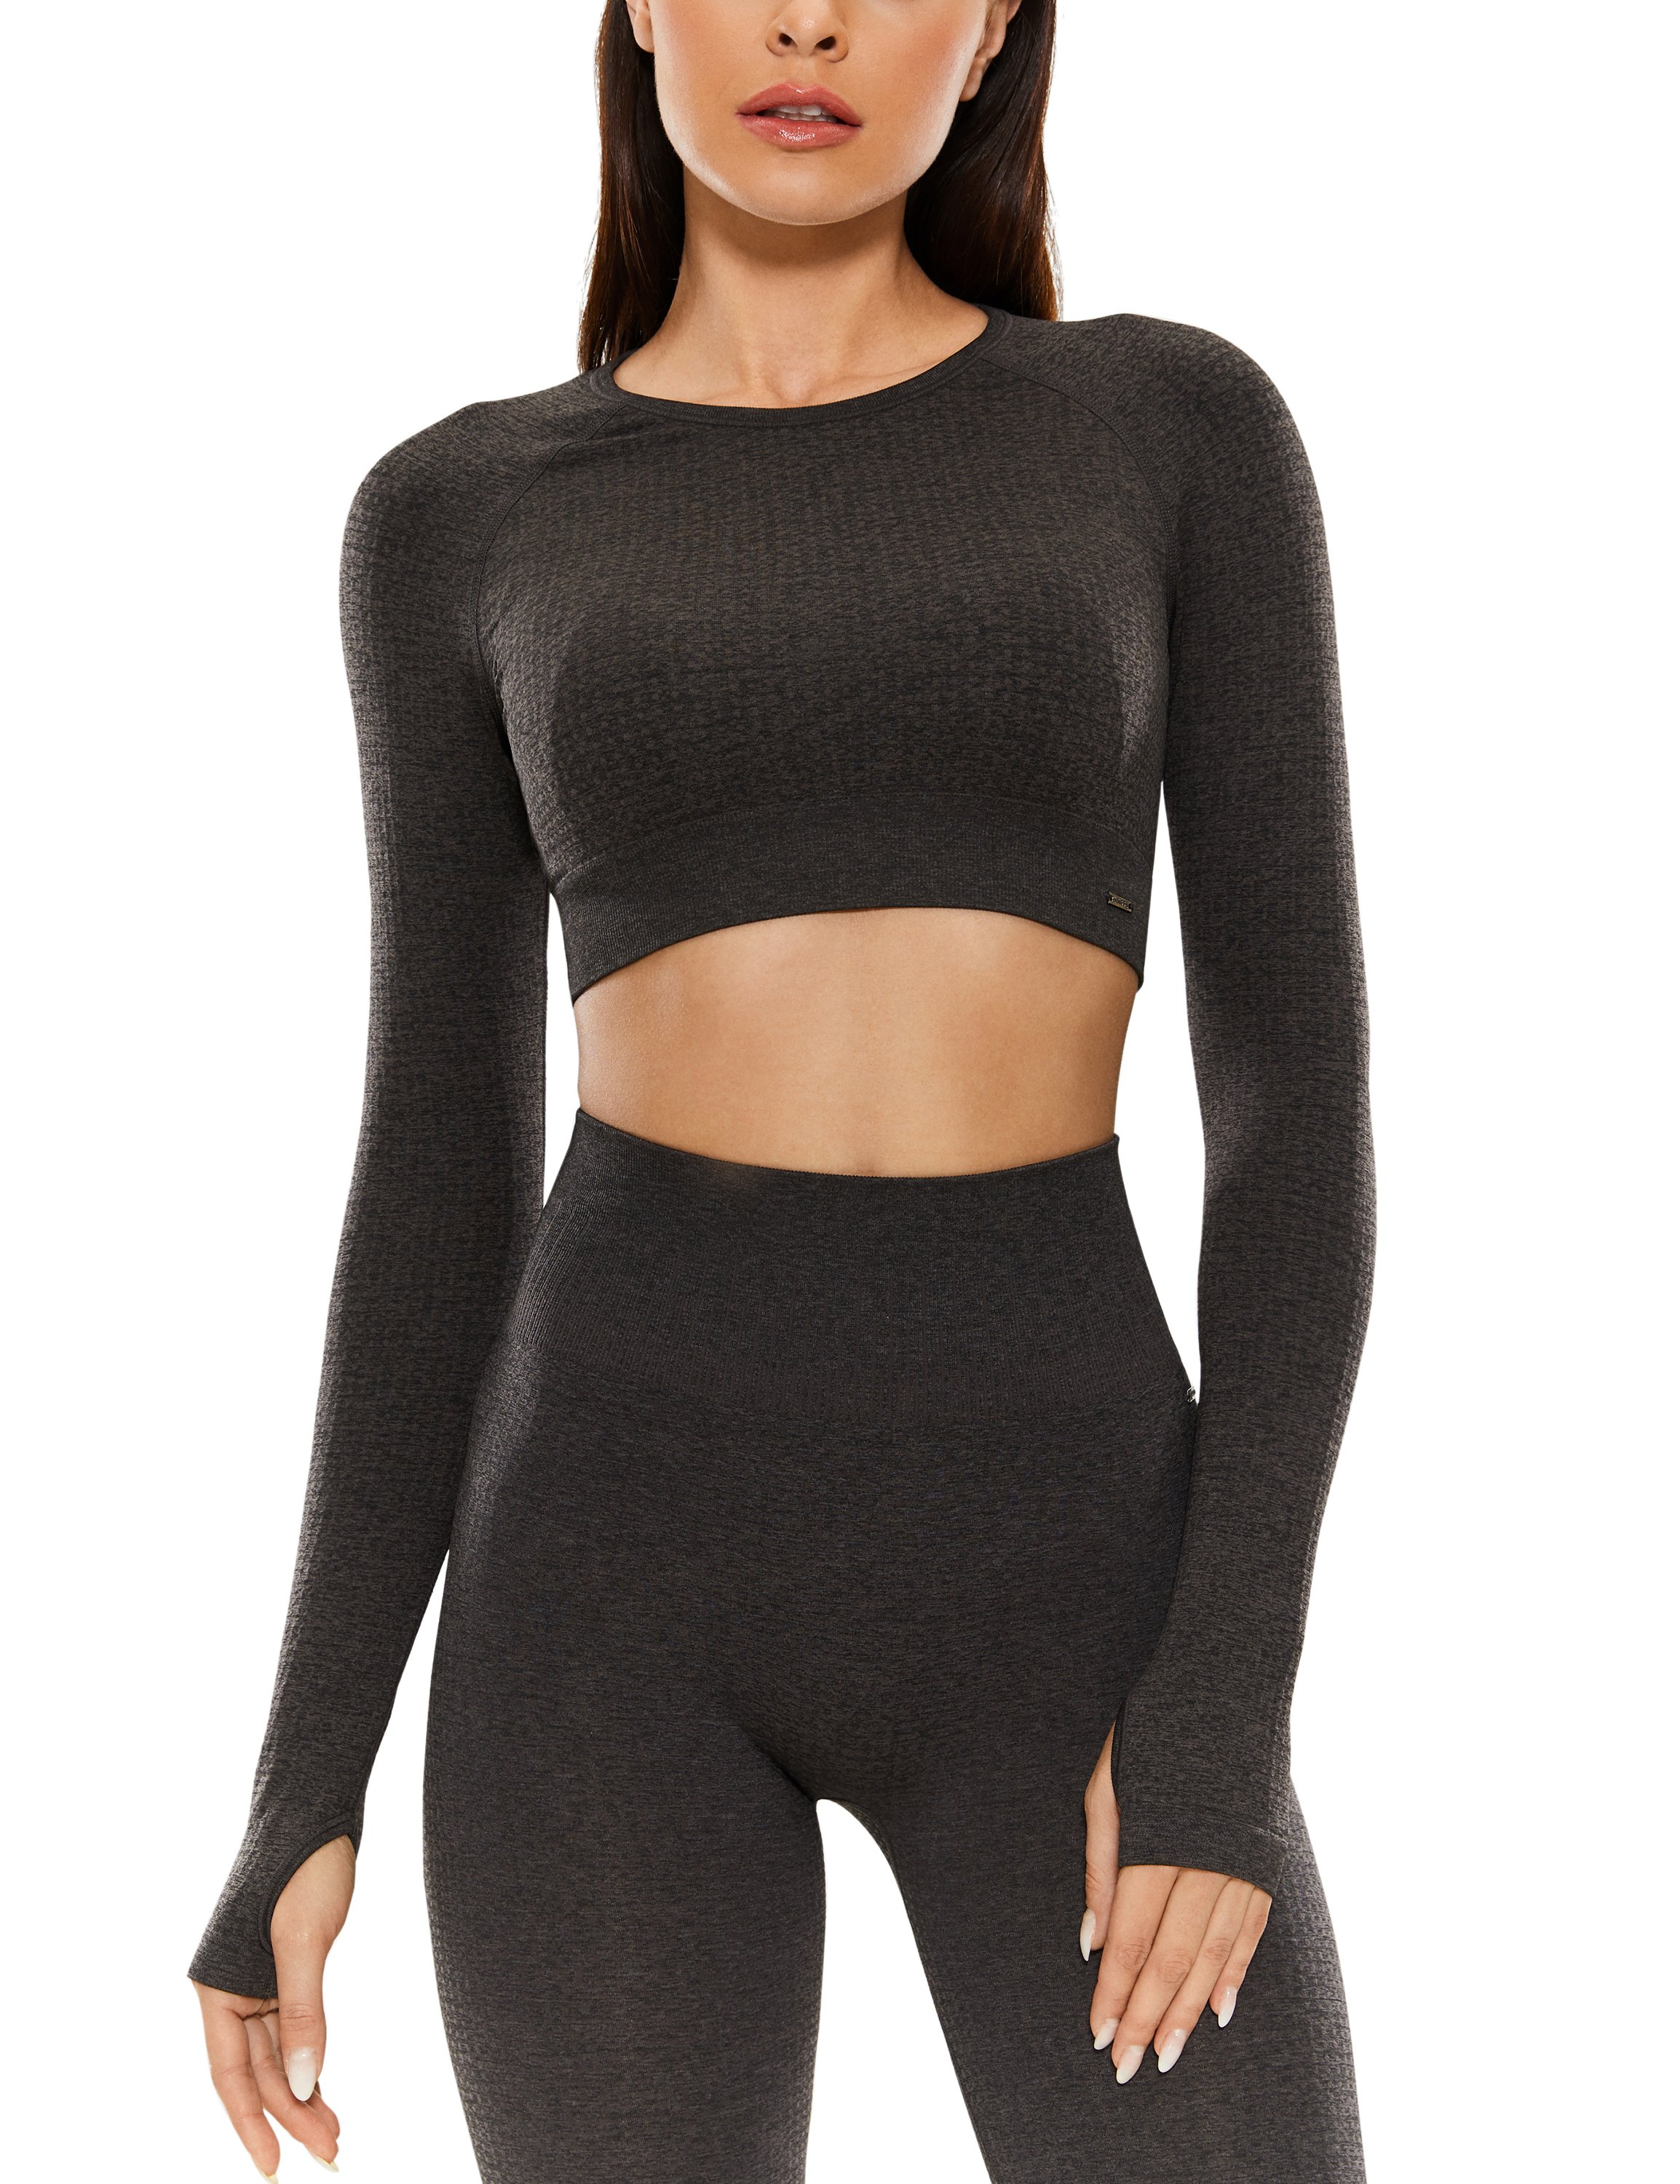 Women's Long Sleeve Crop Tops Workout Shirts Seamless with Thumb